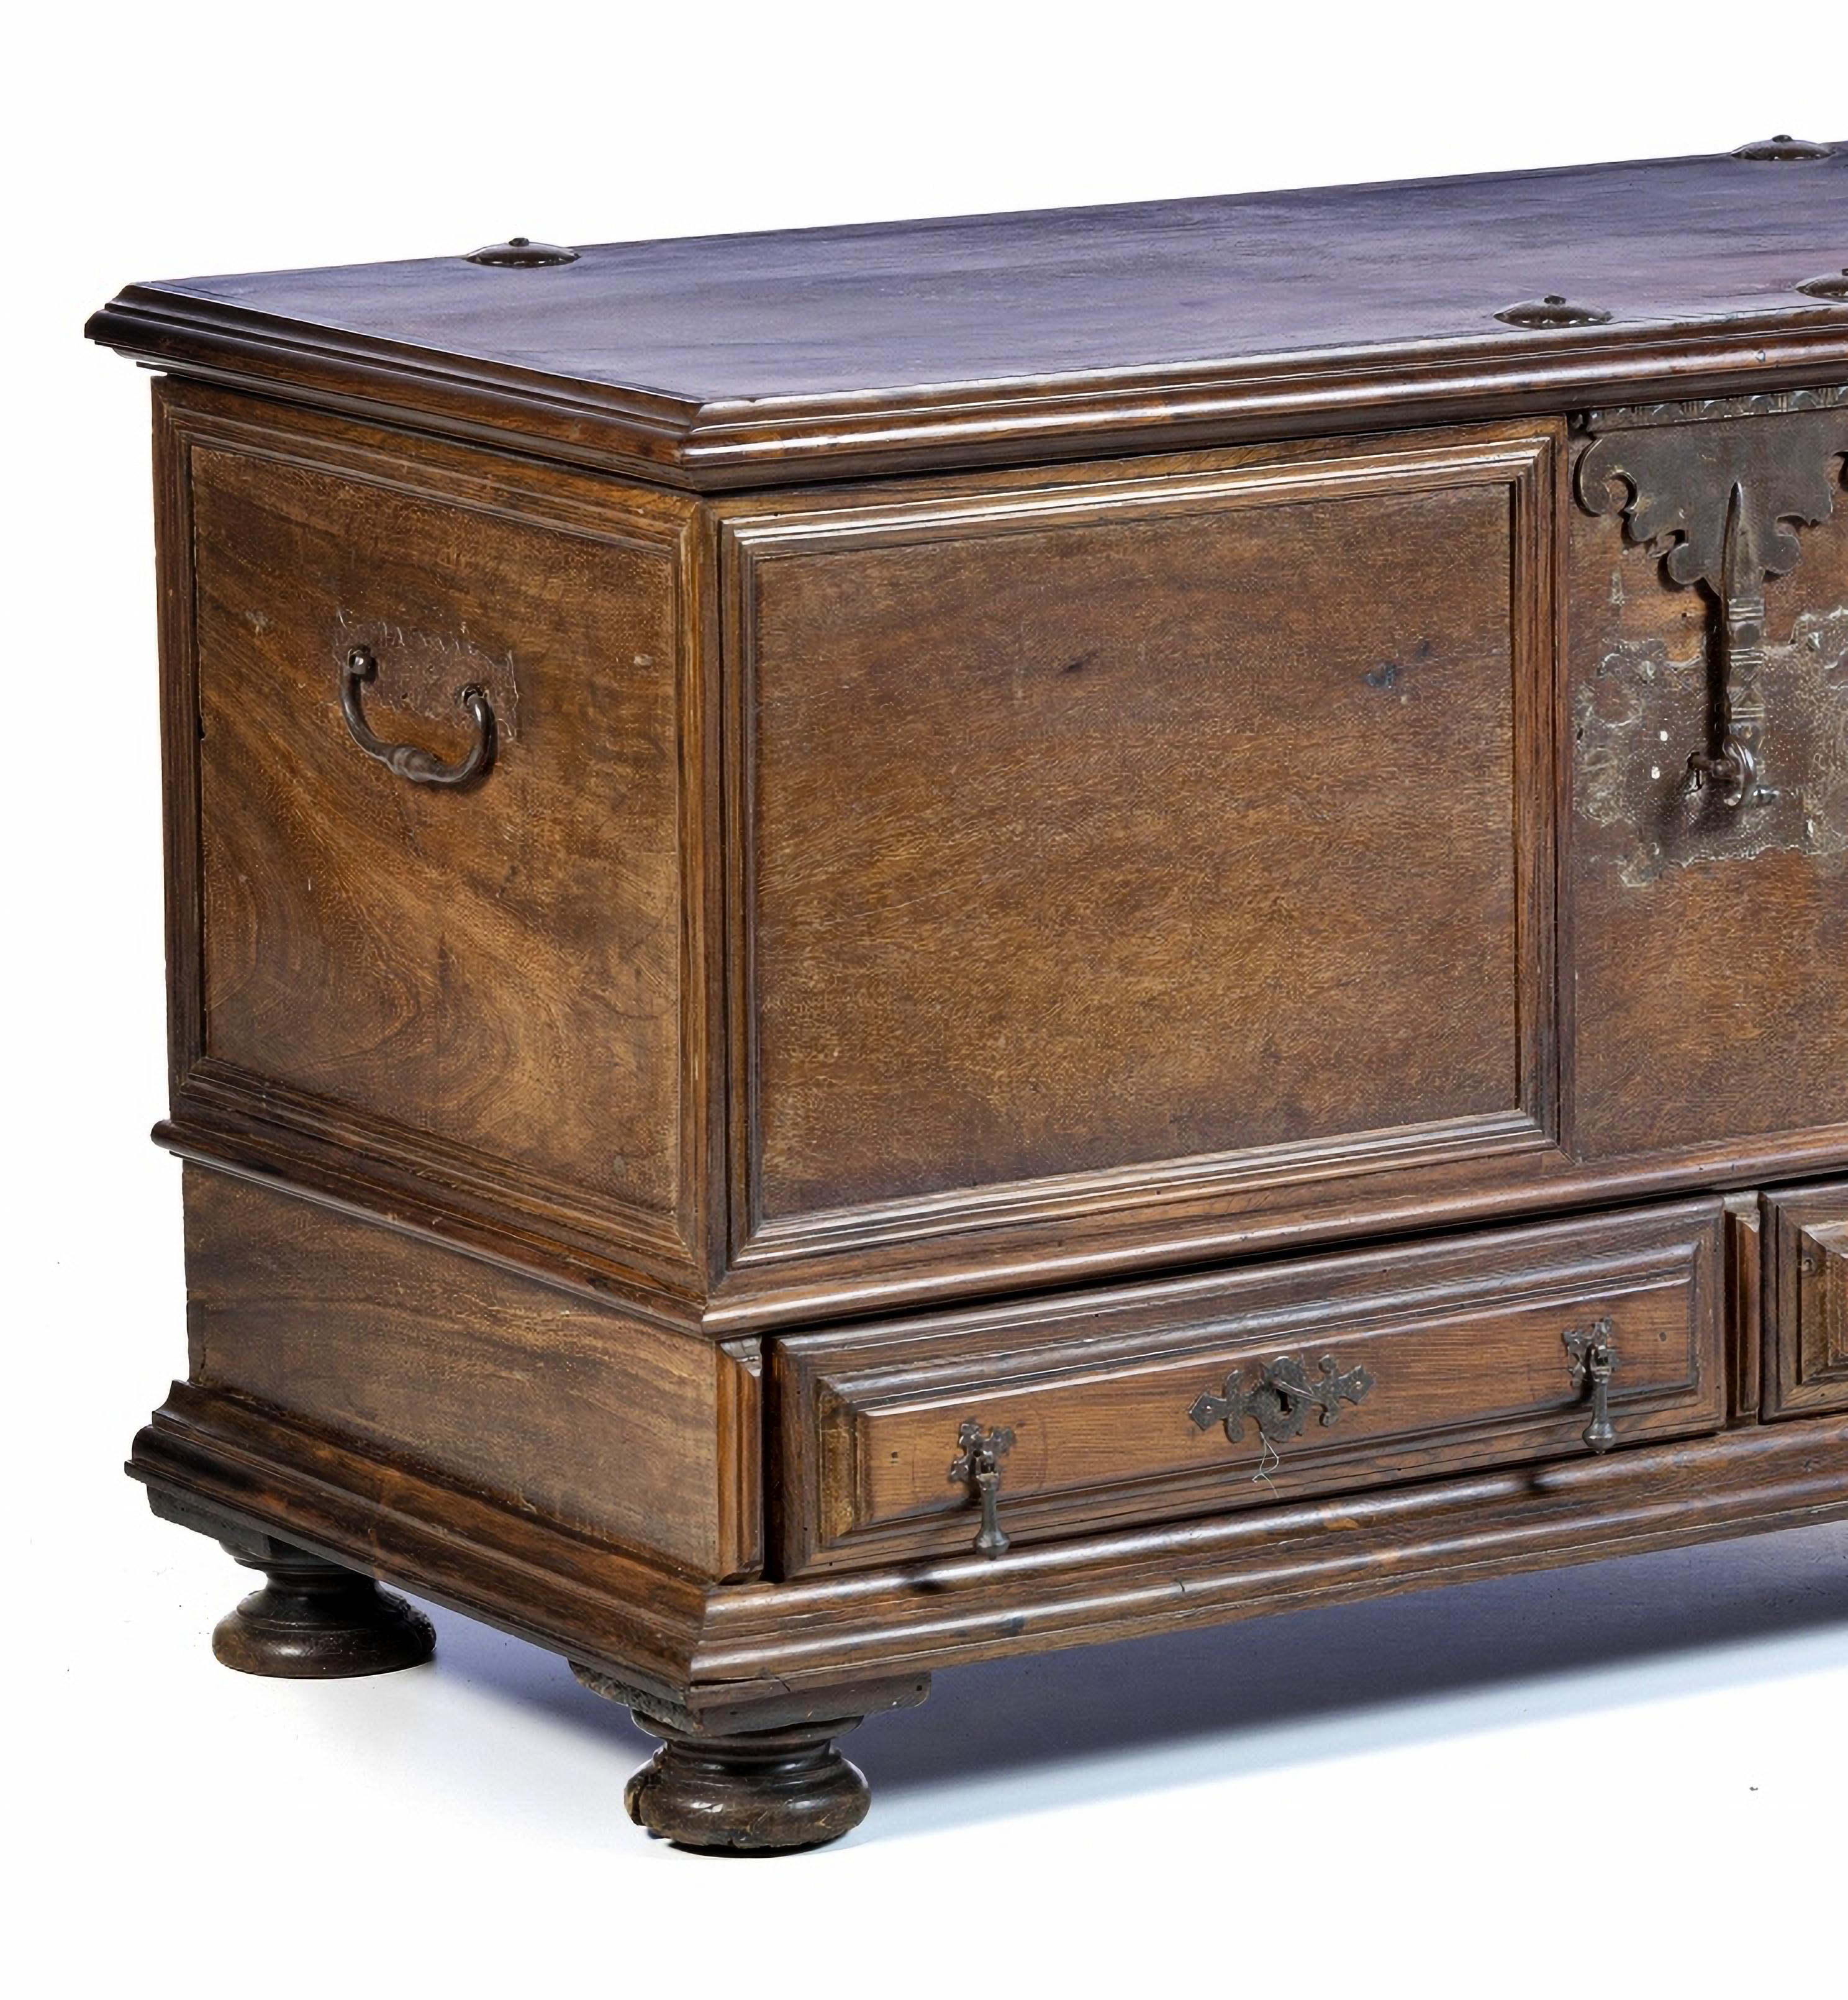 Renaissance Portuguese Rosewood Chest with Two Drawers, 17th Century For Sale